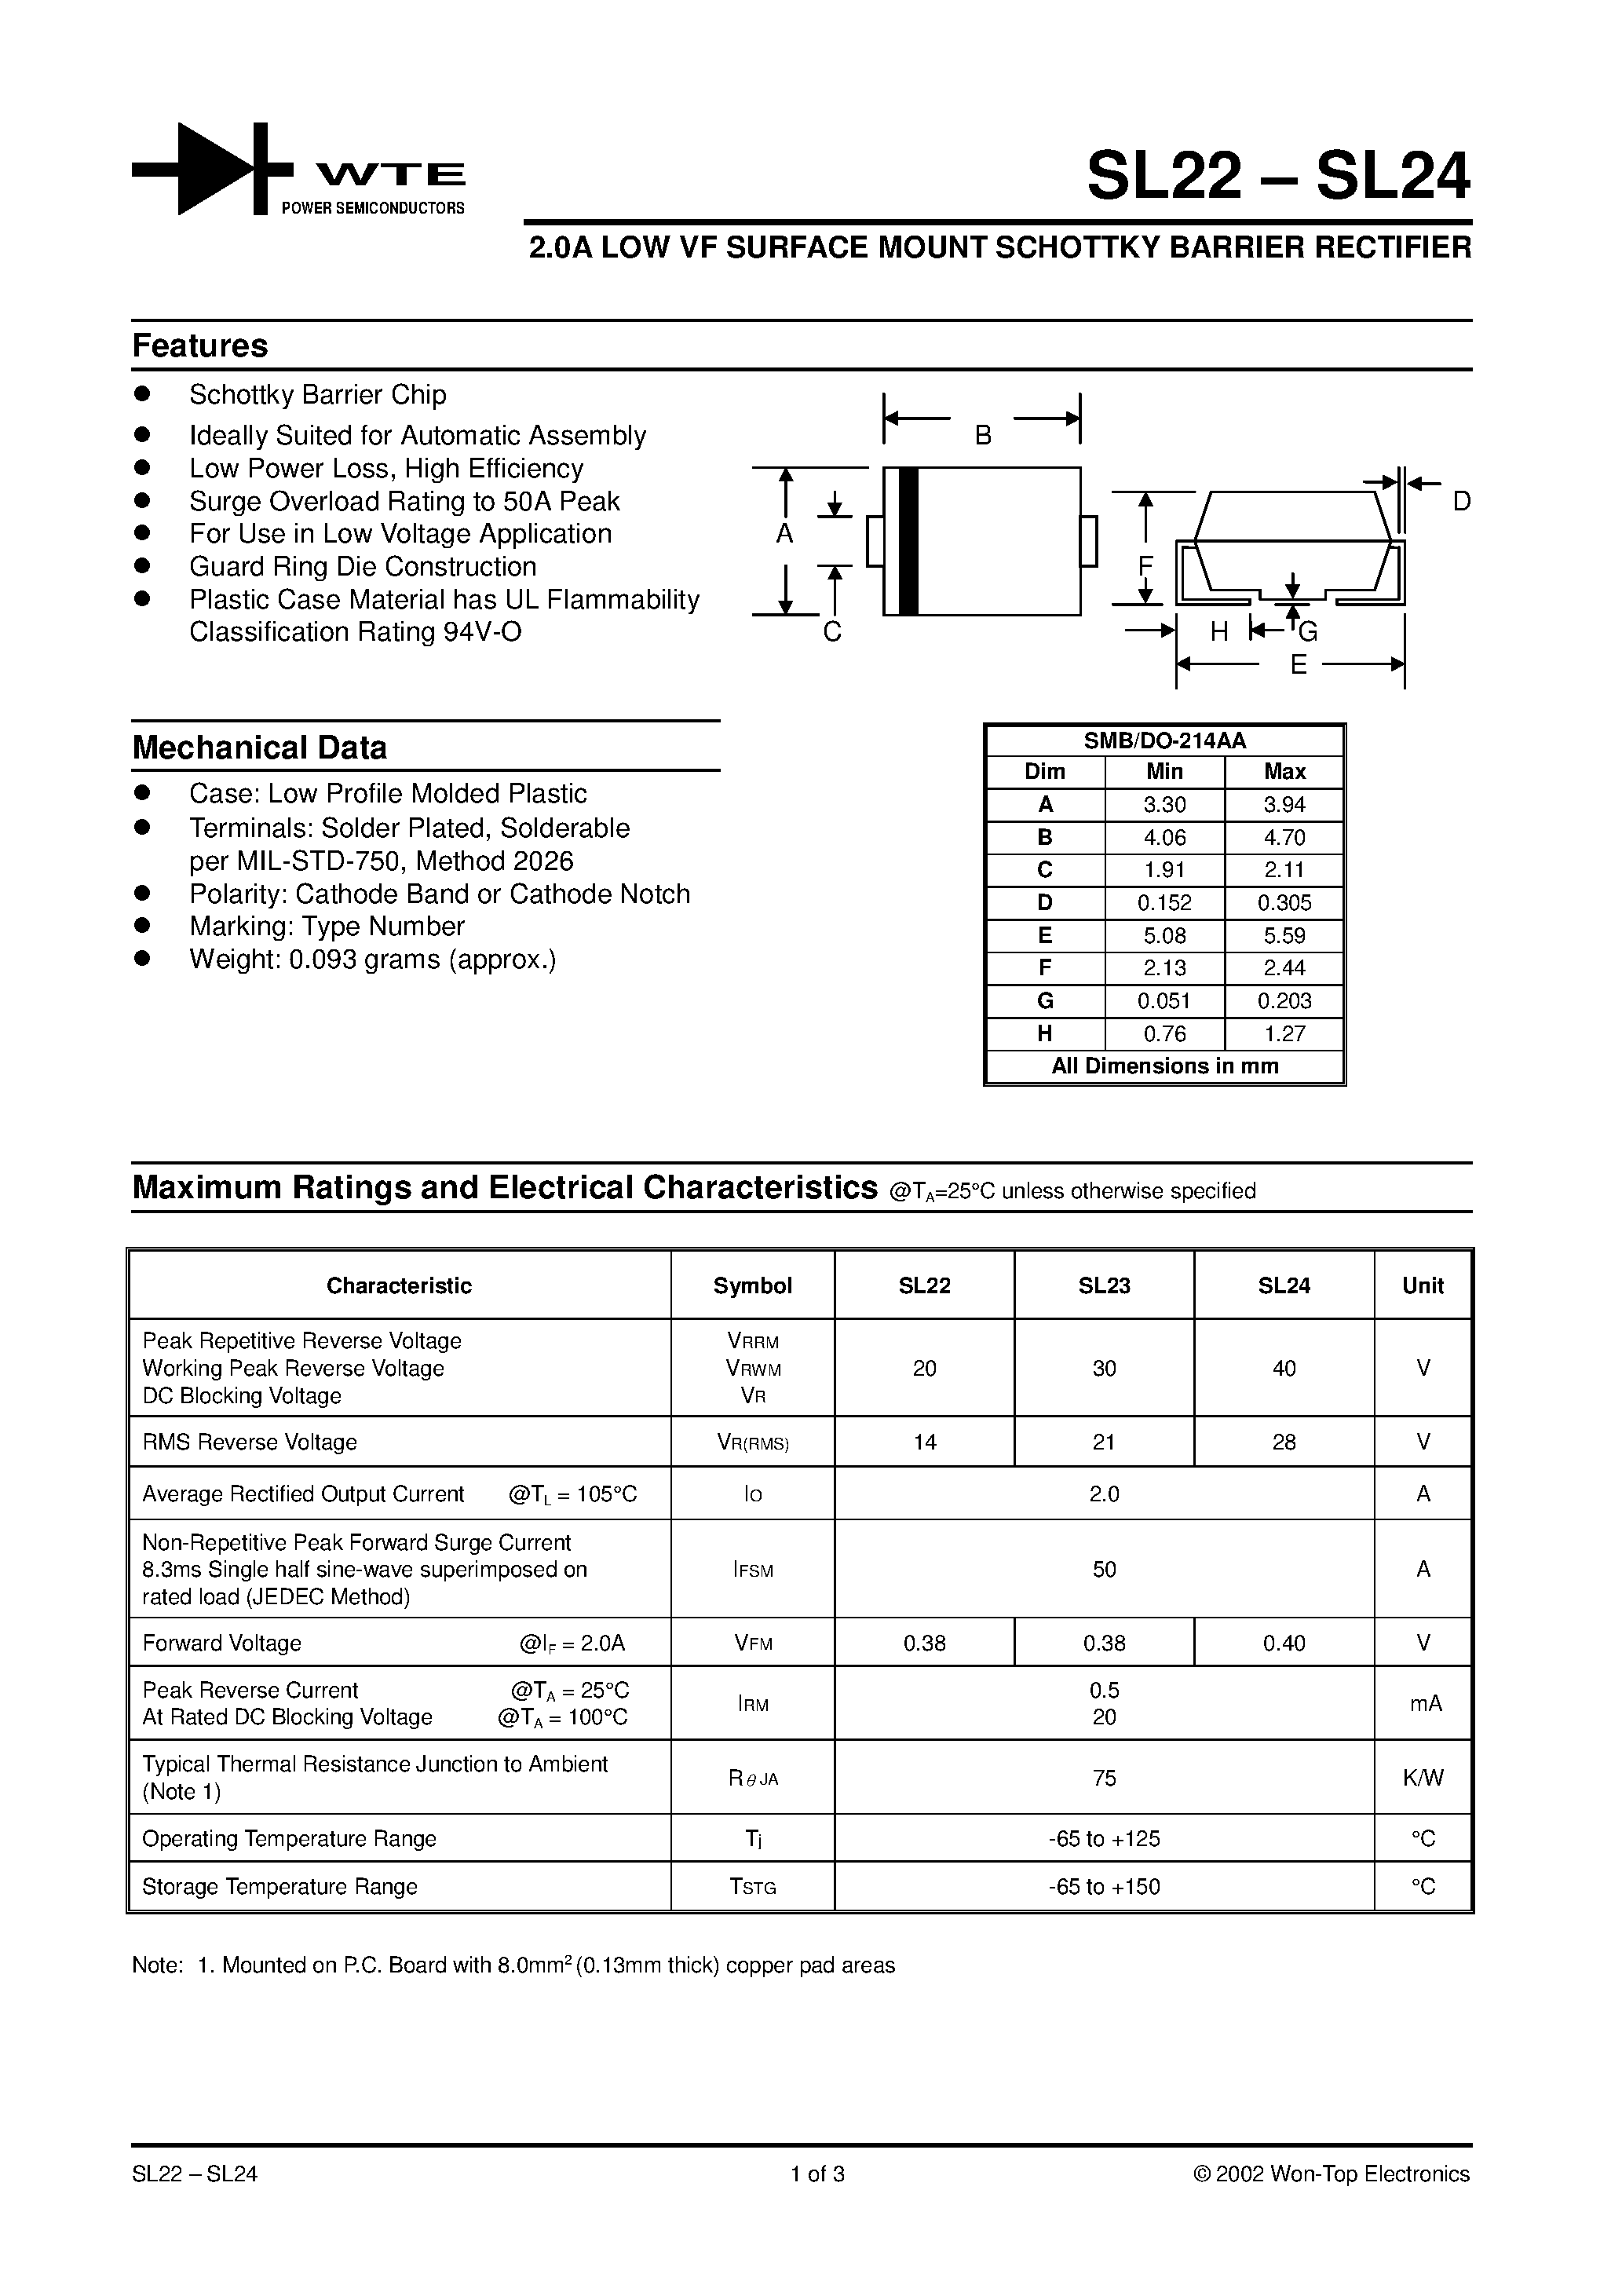 Datasheet SL22 - 2.0A LOW VF SURFACE MOUNT SCHOTTKY BARRIER RECTIFIER page 1